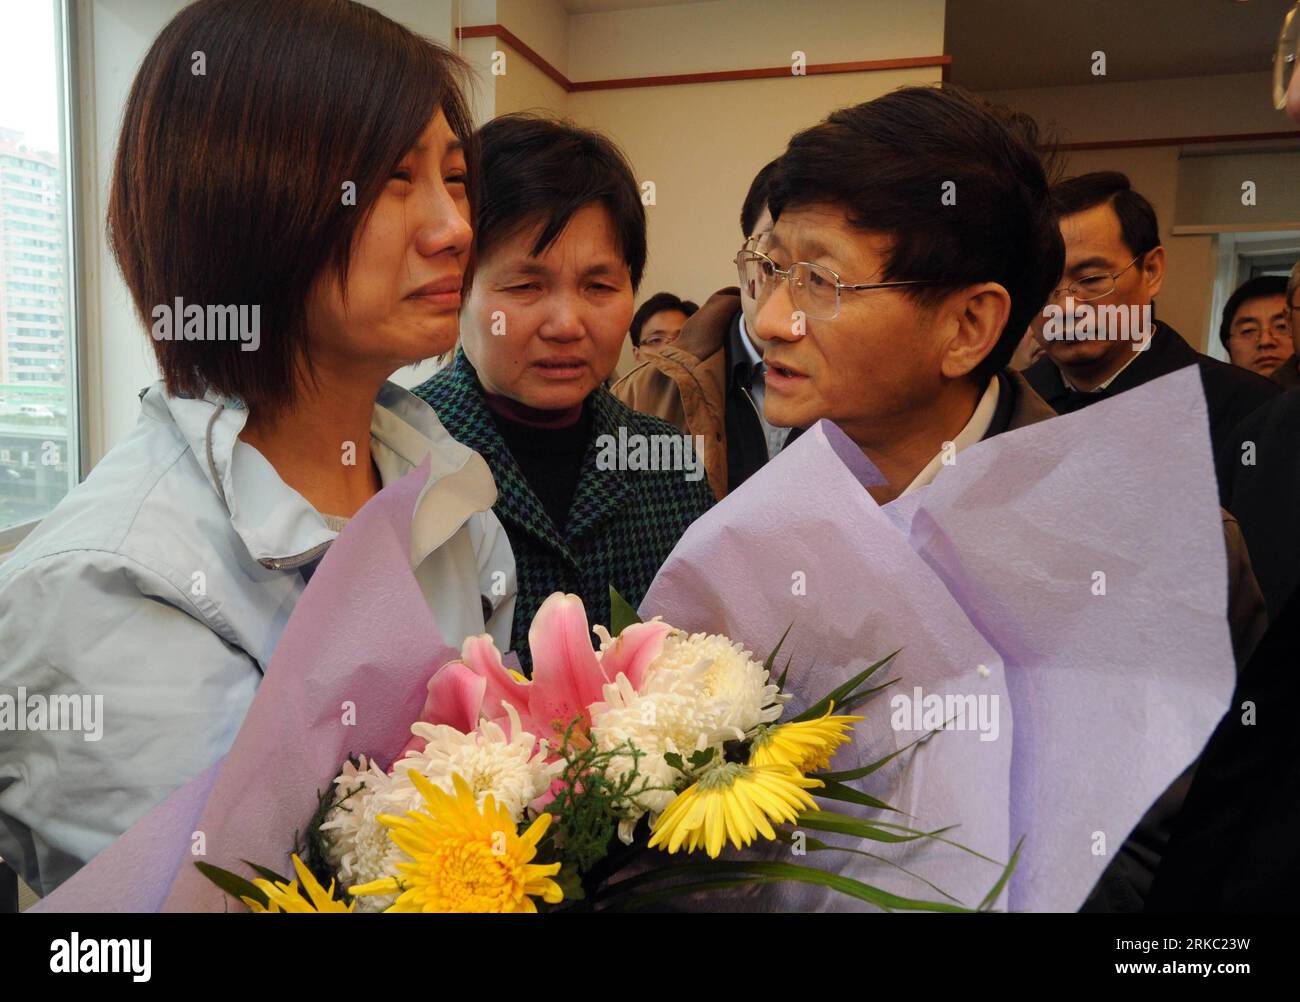 Bildnummer: 54645148  Datum: 16.11.2010  Copyright: imago/Xinhua (101116) -- SHANGHAI, Nov. 16, 2010 (Xinhua) -- Chinese Public Security Minister Meng Jianzhu (R) meets with family members of the fire victims at a local funeral house in Shanghai, east China, Nov. 16, 2010. Meng on Tuesday visited and extended his condolences to the victims and their family members of the fire that engulfed a Shanghai apartment building Monday. (Xinhua/Jin Liangkuai) (zgp) CHINA-SHANGHAI-FIRE-MENG JIANZHU-CONDOLENCE (CN) PUBLICATIONxNOTxINxCHN Gesellschaft Feuer Brand Grossbrand Hochhaus Hochhausbrand kbdig xcb Stock Photo